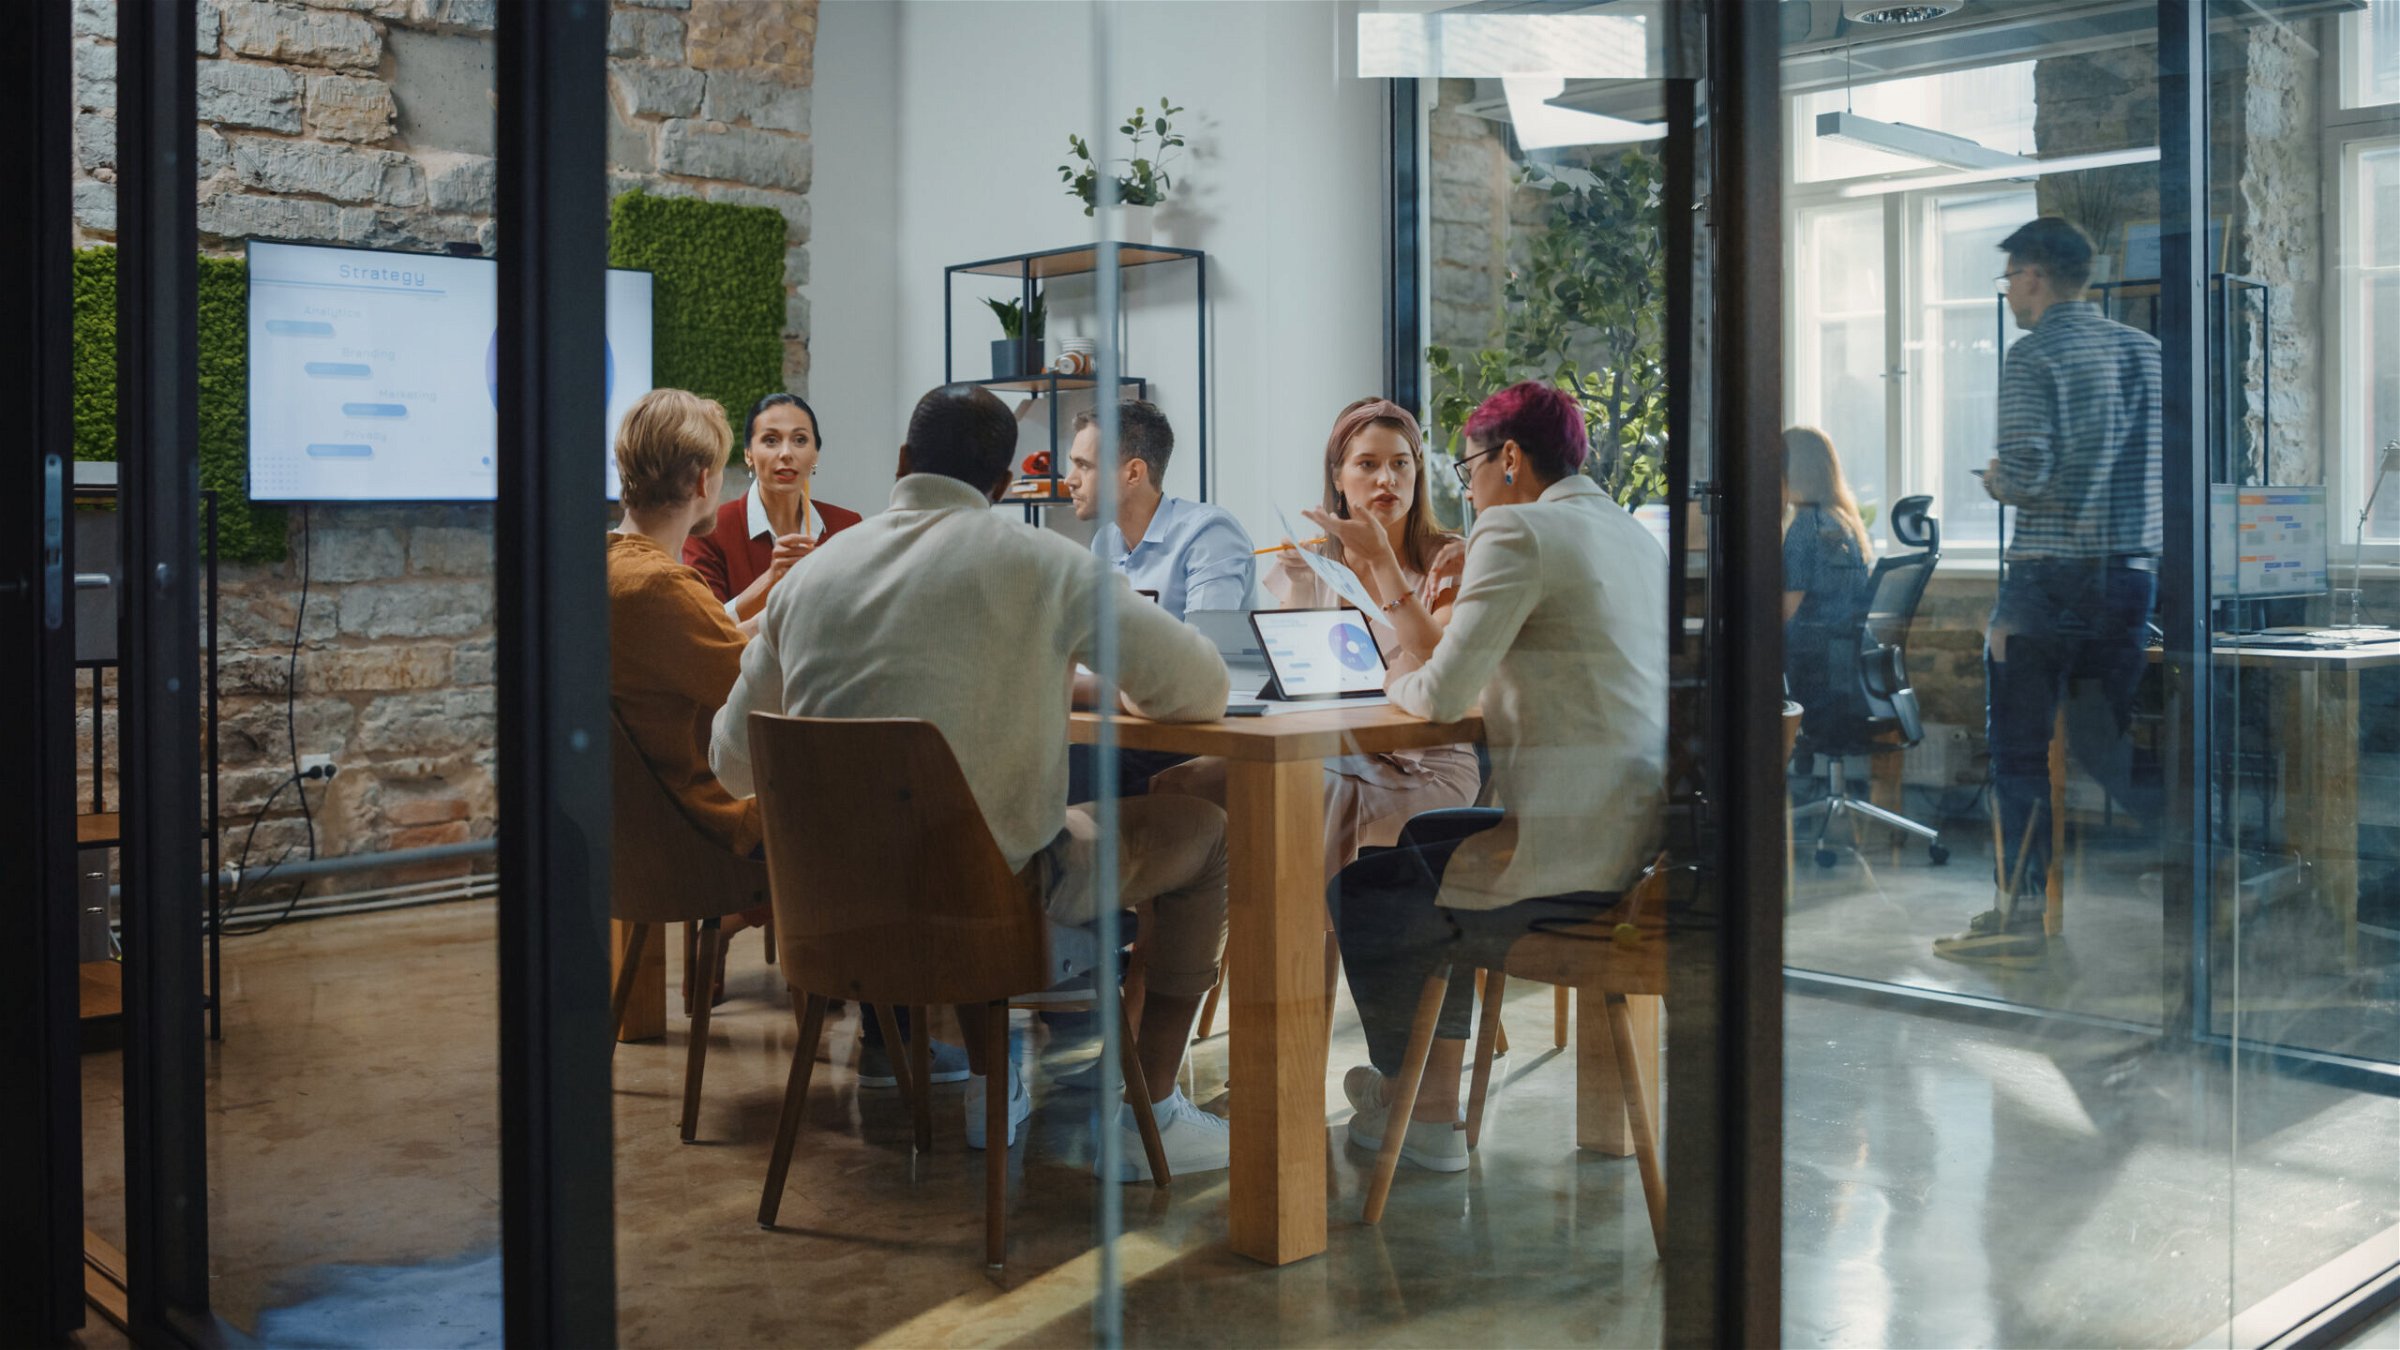 A team having an effective meeting in a glass room.